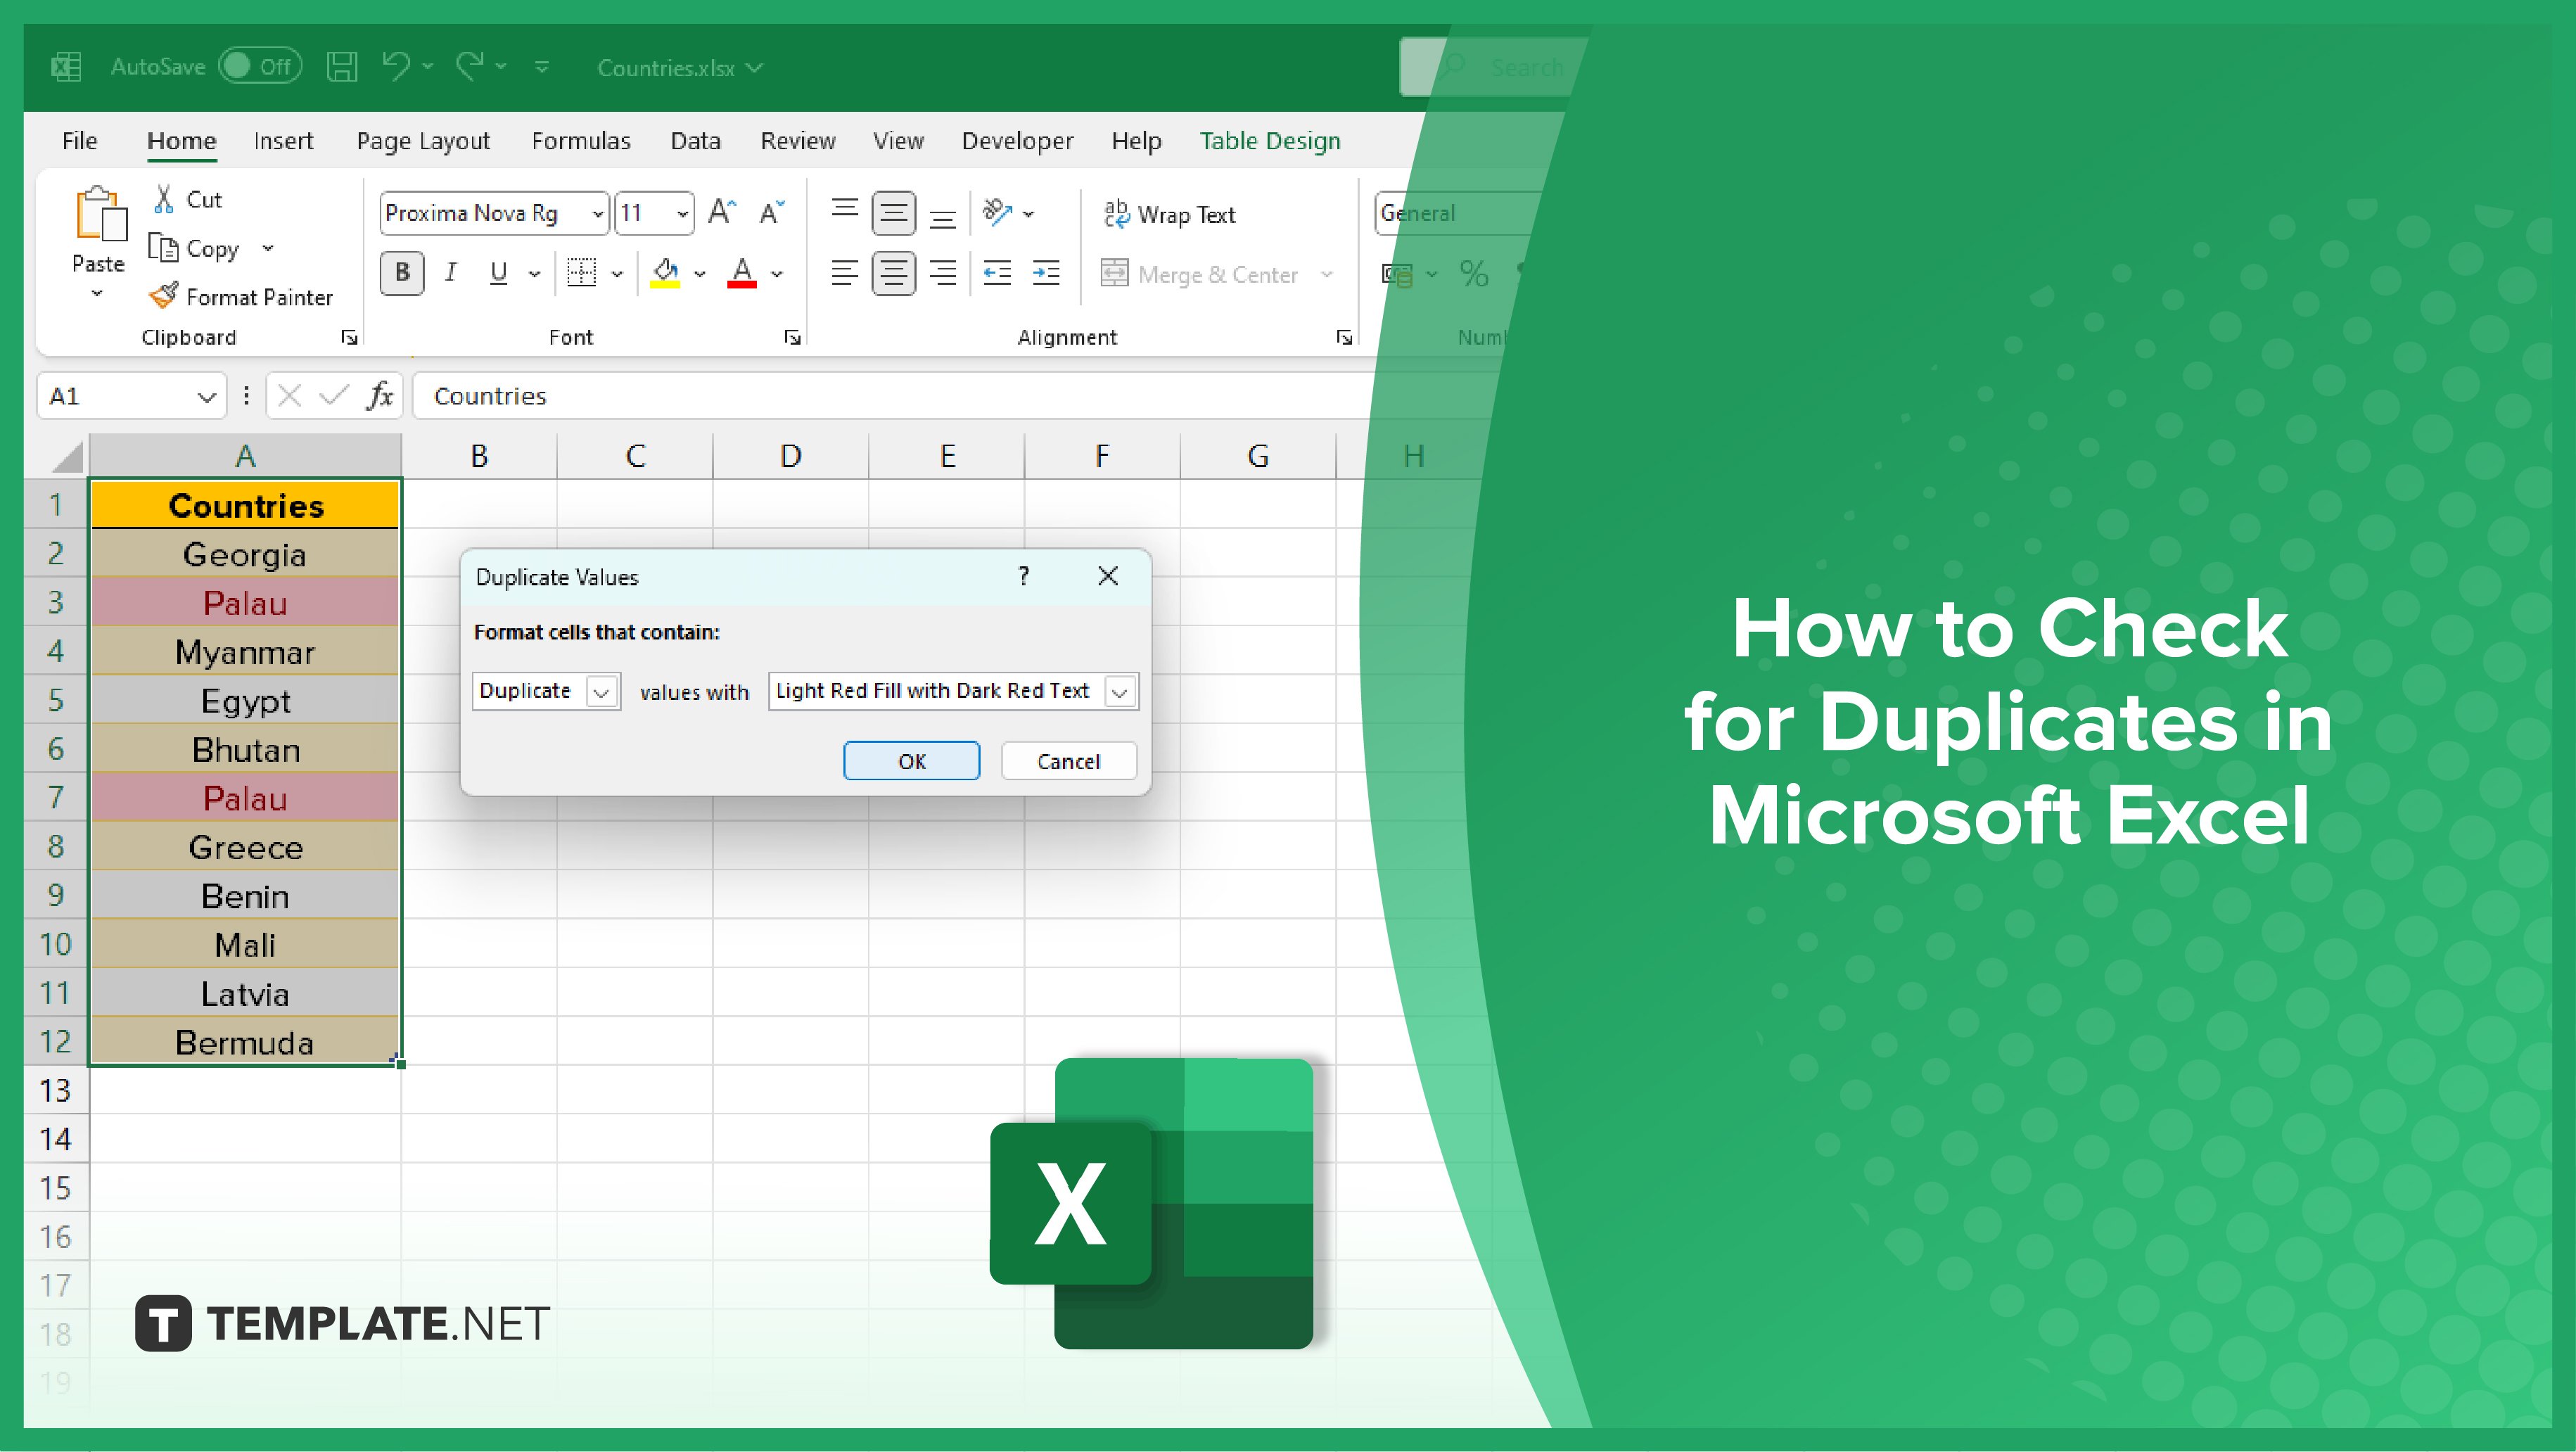 How to Check for Duplicates in Microsoft Excel